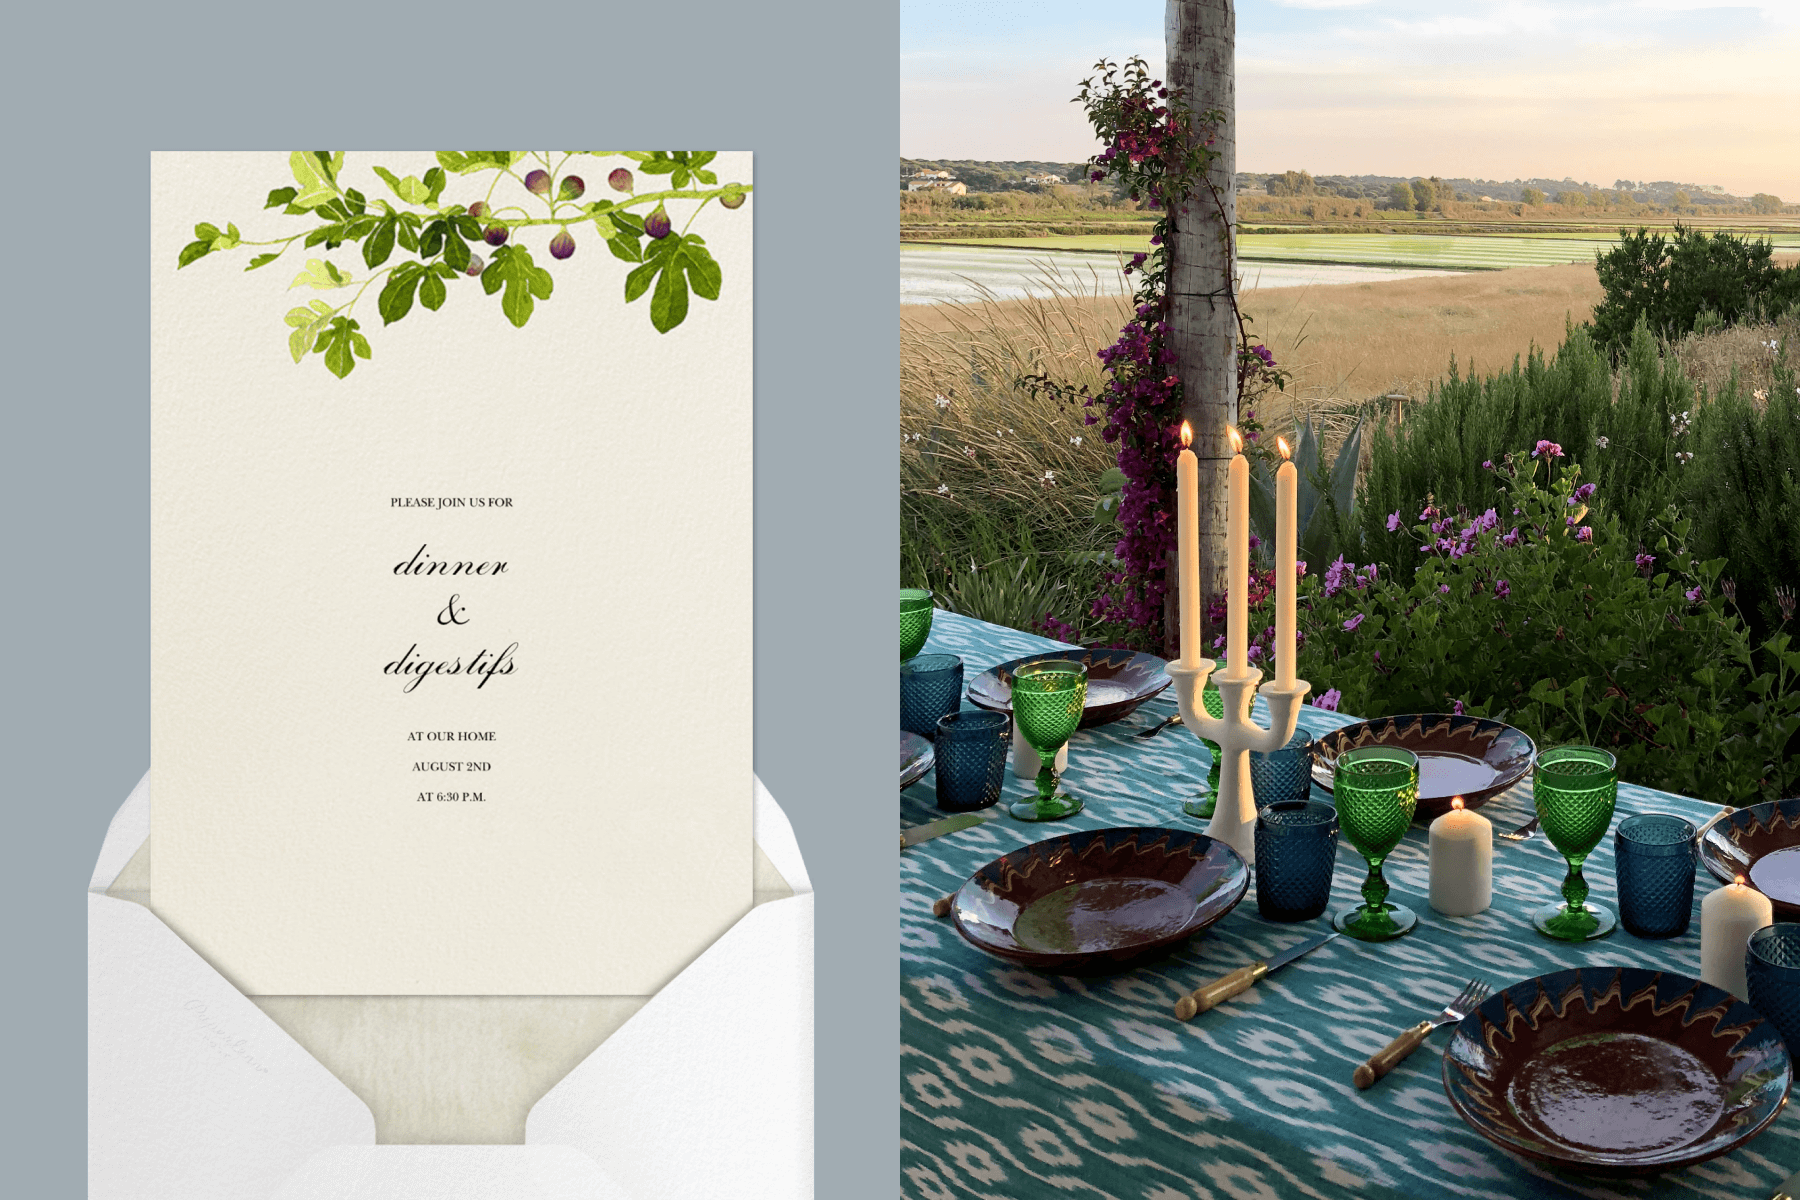 Left: delicately painted invitation featuring fig branches; Right: teal and green table setting overlooking tidal marshes.